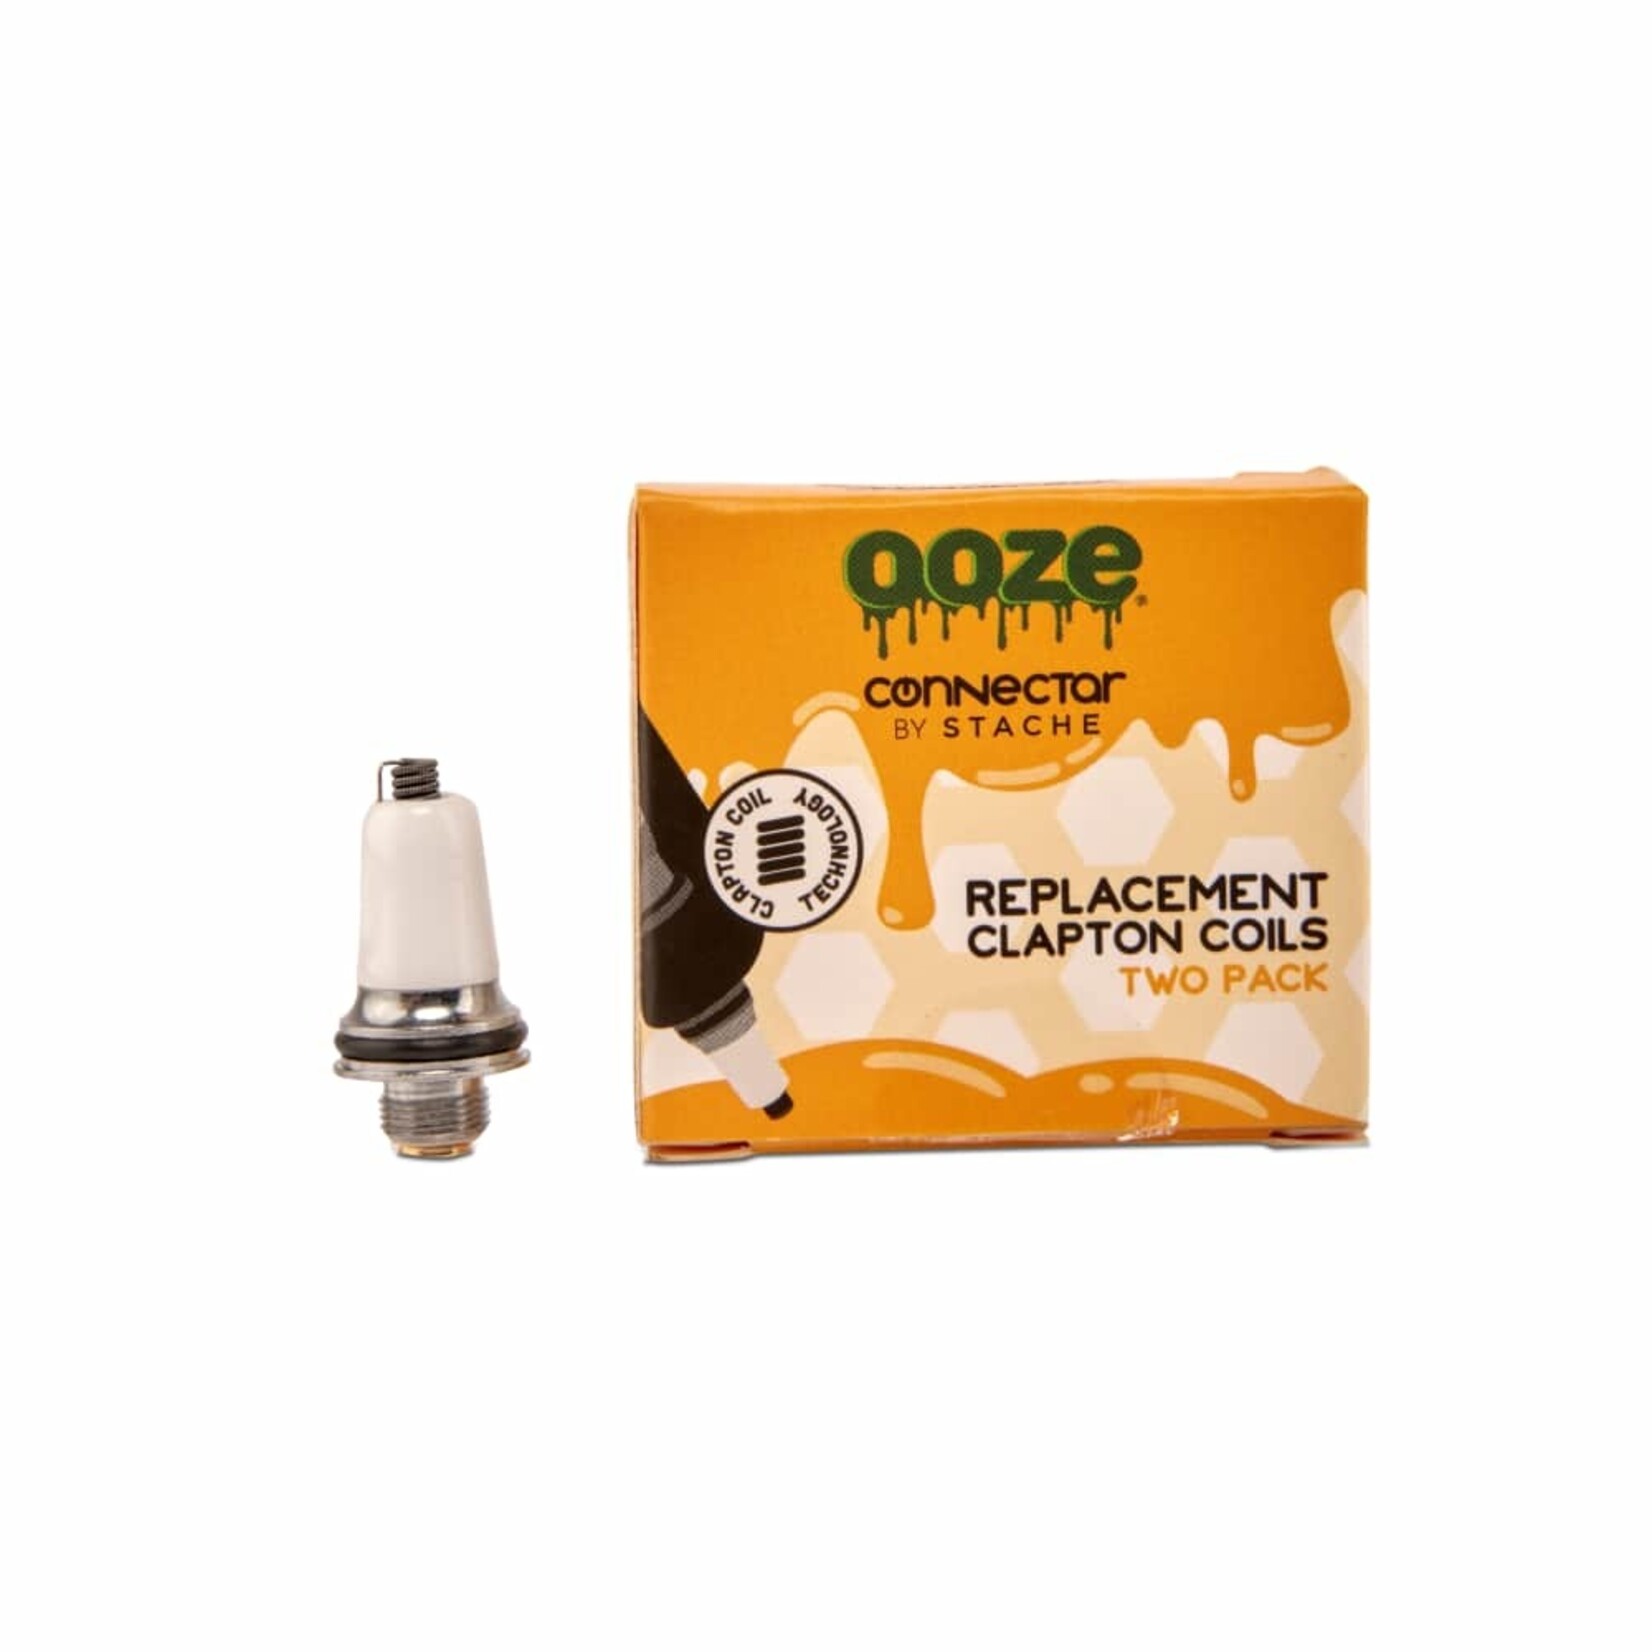 Ooze Ooze x Stache Replacement Clapton Coil 2-Pack for the ConNectar